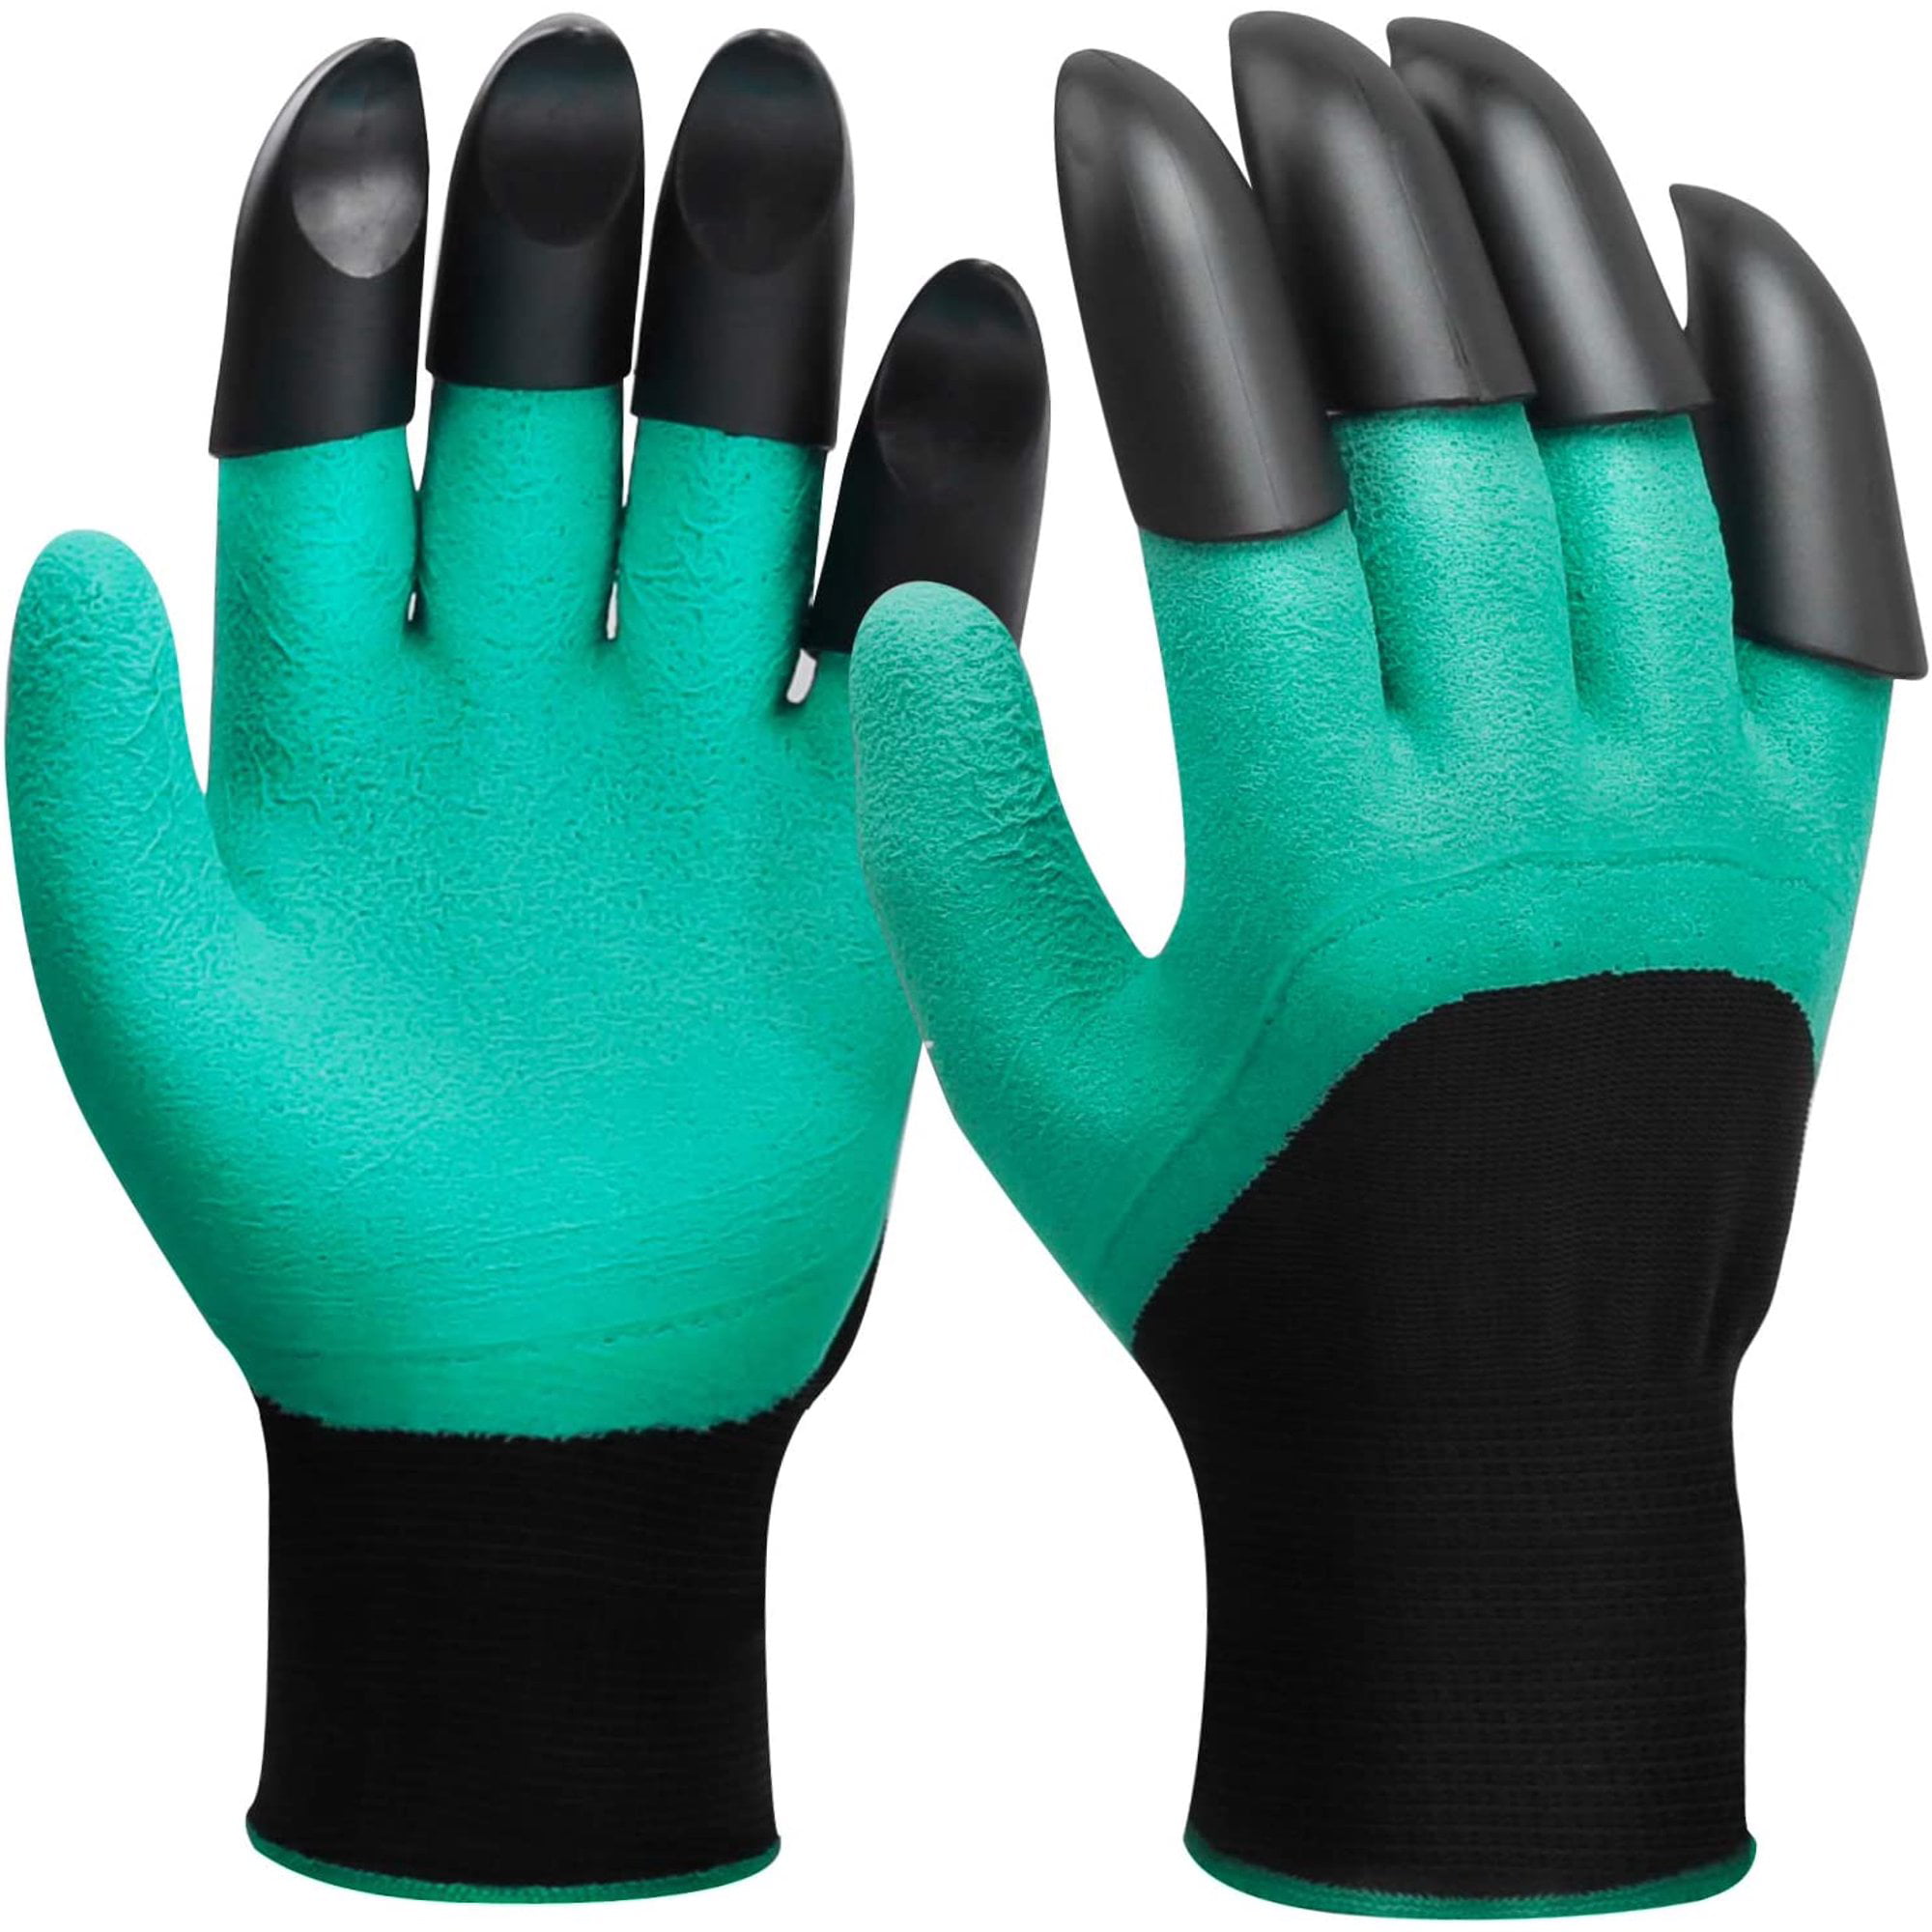 Gardening Digging Planting Gloves Pruning Tools Lawn Care 8 Claws Garden Genie 